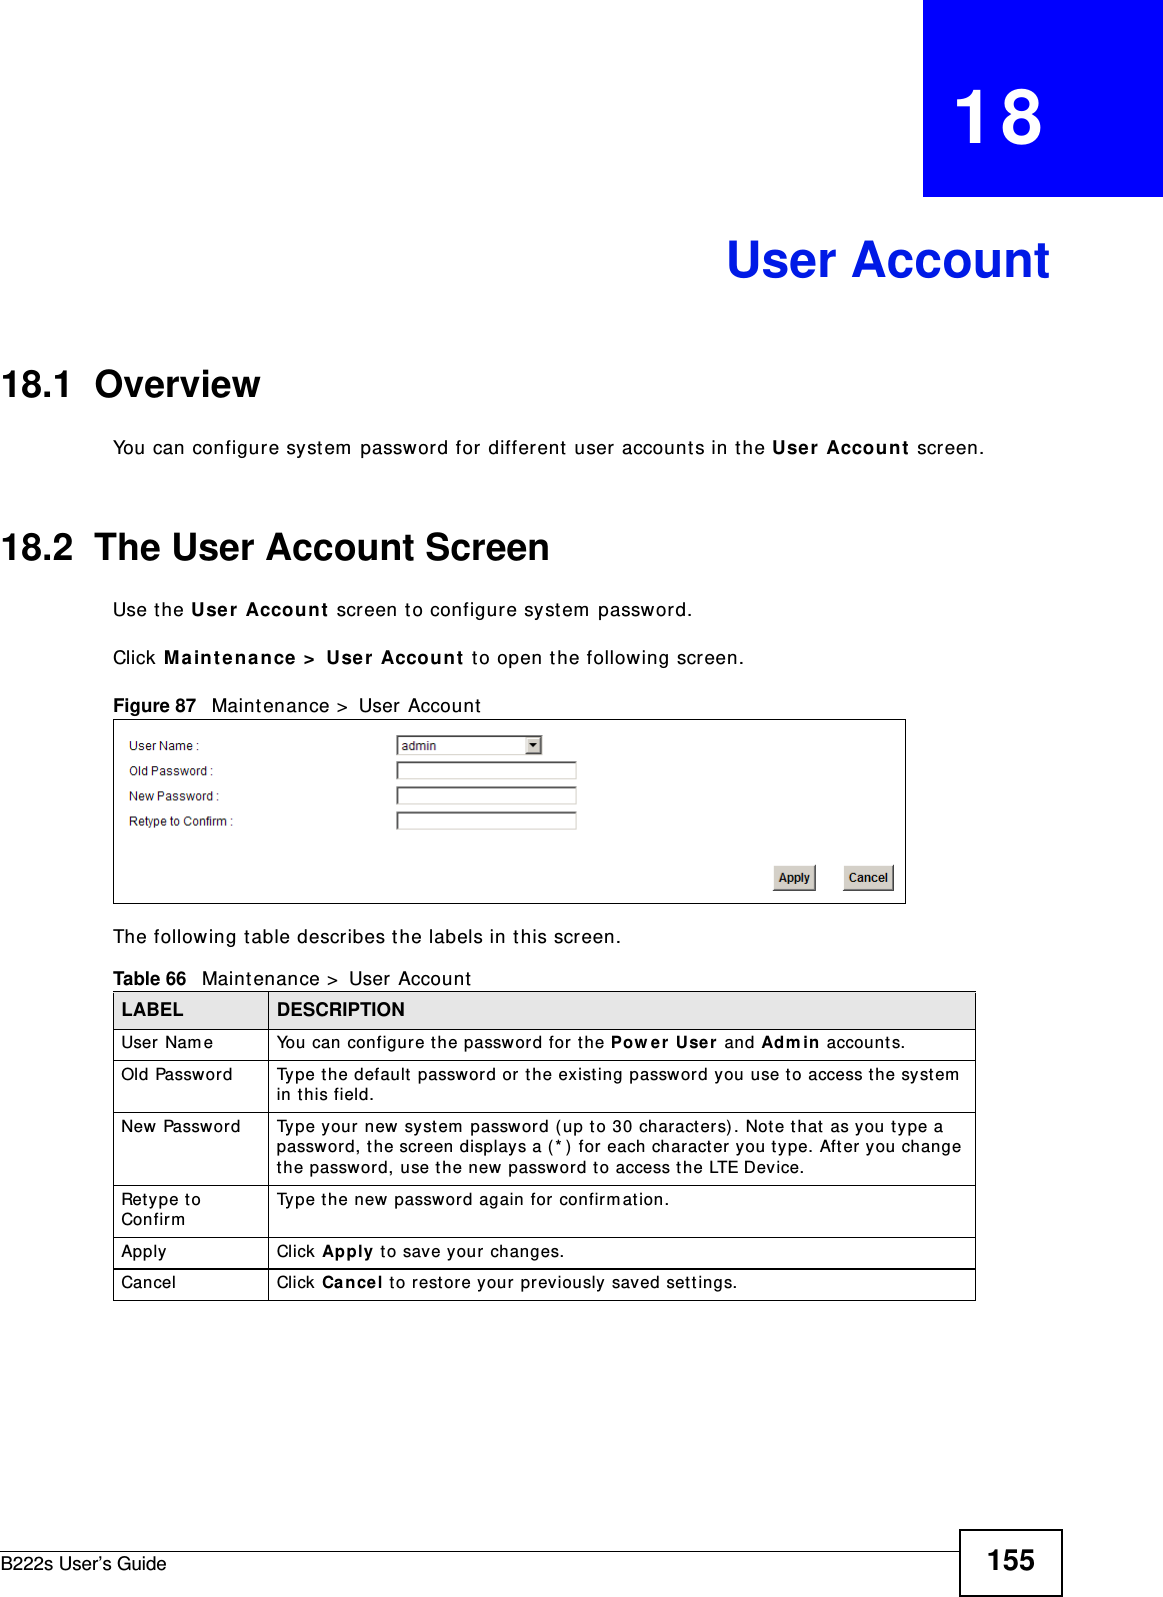 B222s User’s Guide 155CHAPTER   18User Account18.1  Overview You can configure syst em  passw ord for different  user account s in the User Accou nt  screen.18.2  The User Account ScreenUse t he Use r  Accoun t  screen t o configure system  passw ord.Click M a int e na nce &gt;  User  Account  t o open t he following screen. Figure 87   Maint enance &gt;  User AccountThe following t able describes t he labels in t his screen. Table 66   Maint enance &gt;  User AccountLABEL DESCRIPTIONUser Nam e You can configure the password for t he Pow er User  and Adm in  account s.Old Password Type t he default  password or t he existing password you use to access the syst em  in t his field.New Password Type your new system  password ( up to 30 characters). Note t hat  as you t ype a passwor d, t he screen displays a ( * )  for  each character you t ype. Aft er you change the password, use t he new password t o access t he LTE Device.Ret ype t o ConfirmType t he new password again for confirm at ion.Apply Click Apply t o save your changes.Cancel Click Ca ncel t o rest ore your  previously saved sett ings.